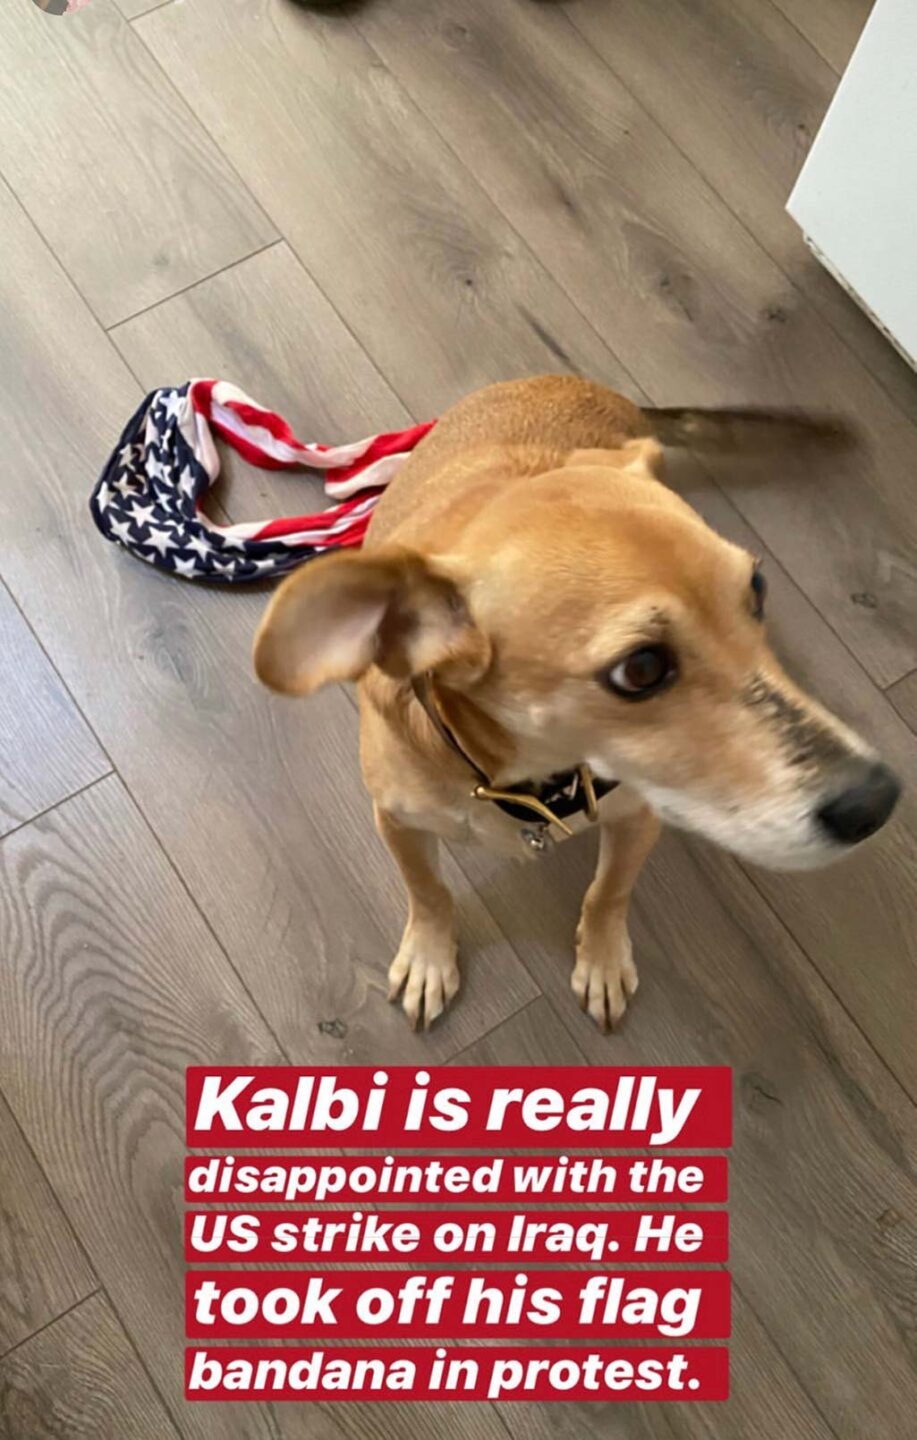 Kalbi looking away from a wrinkled American flag bandana he shook off of his neck. Overlaid meme text: Kalbi is really disappointed with the US strike on Iraq. He took off his flag bandana in protest.